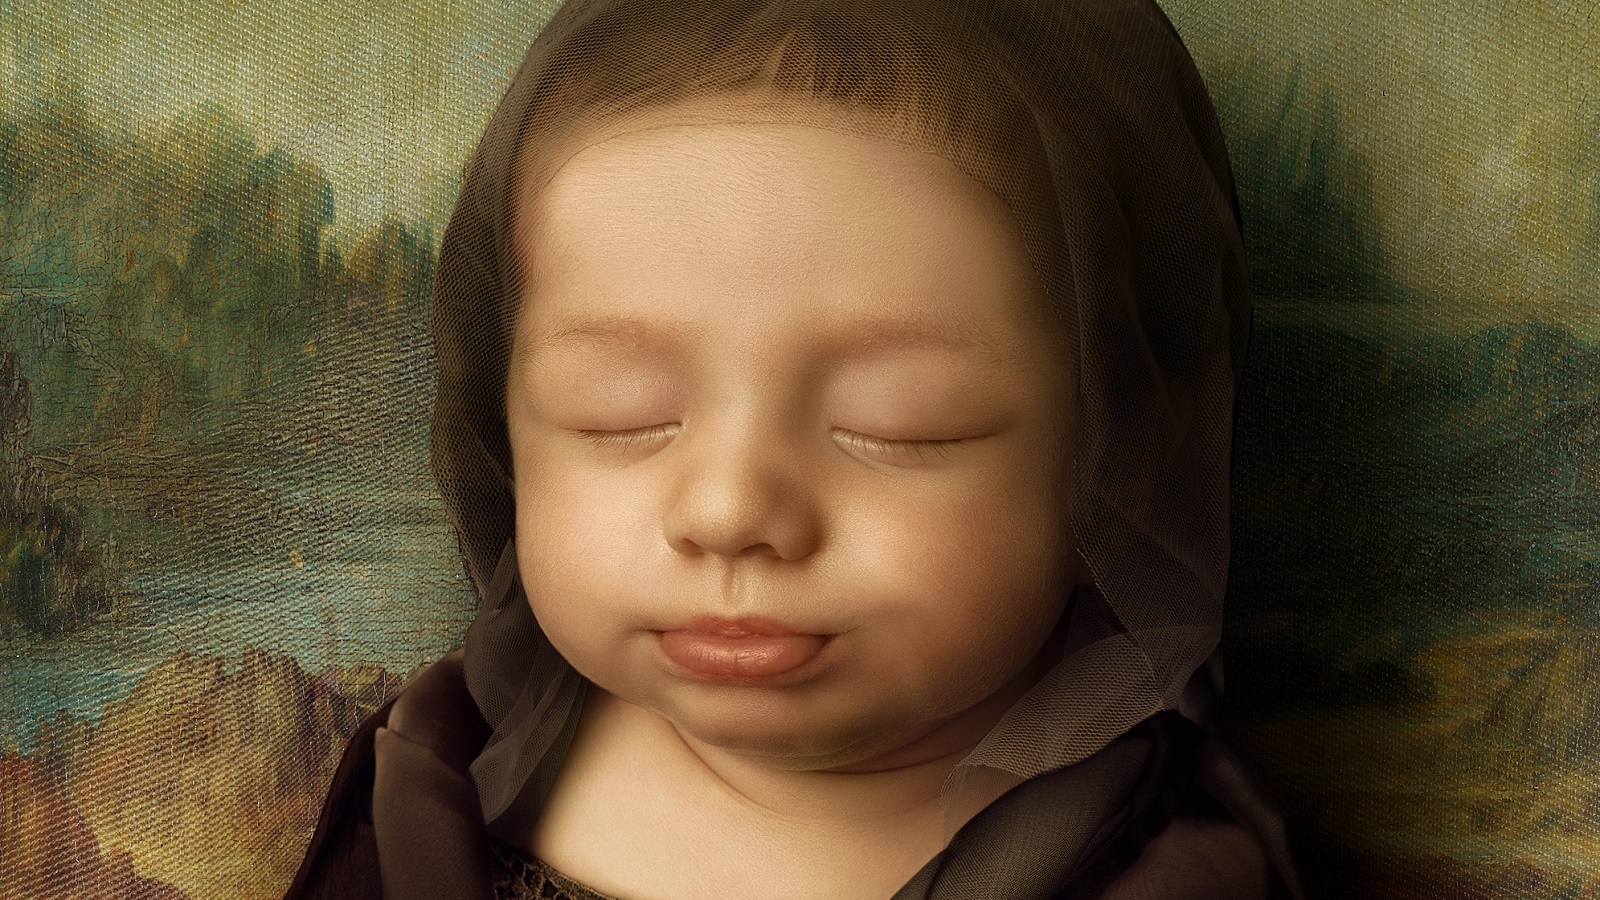 Cute Newborn Might Be the Secret Behind Mona Lisa’s Smile